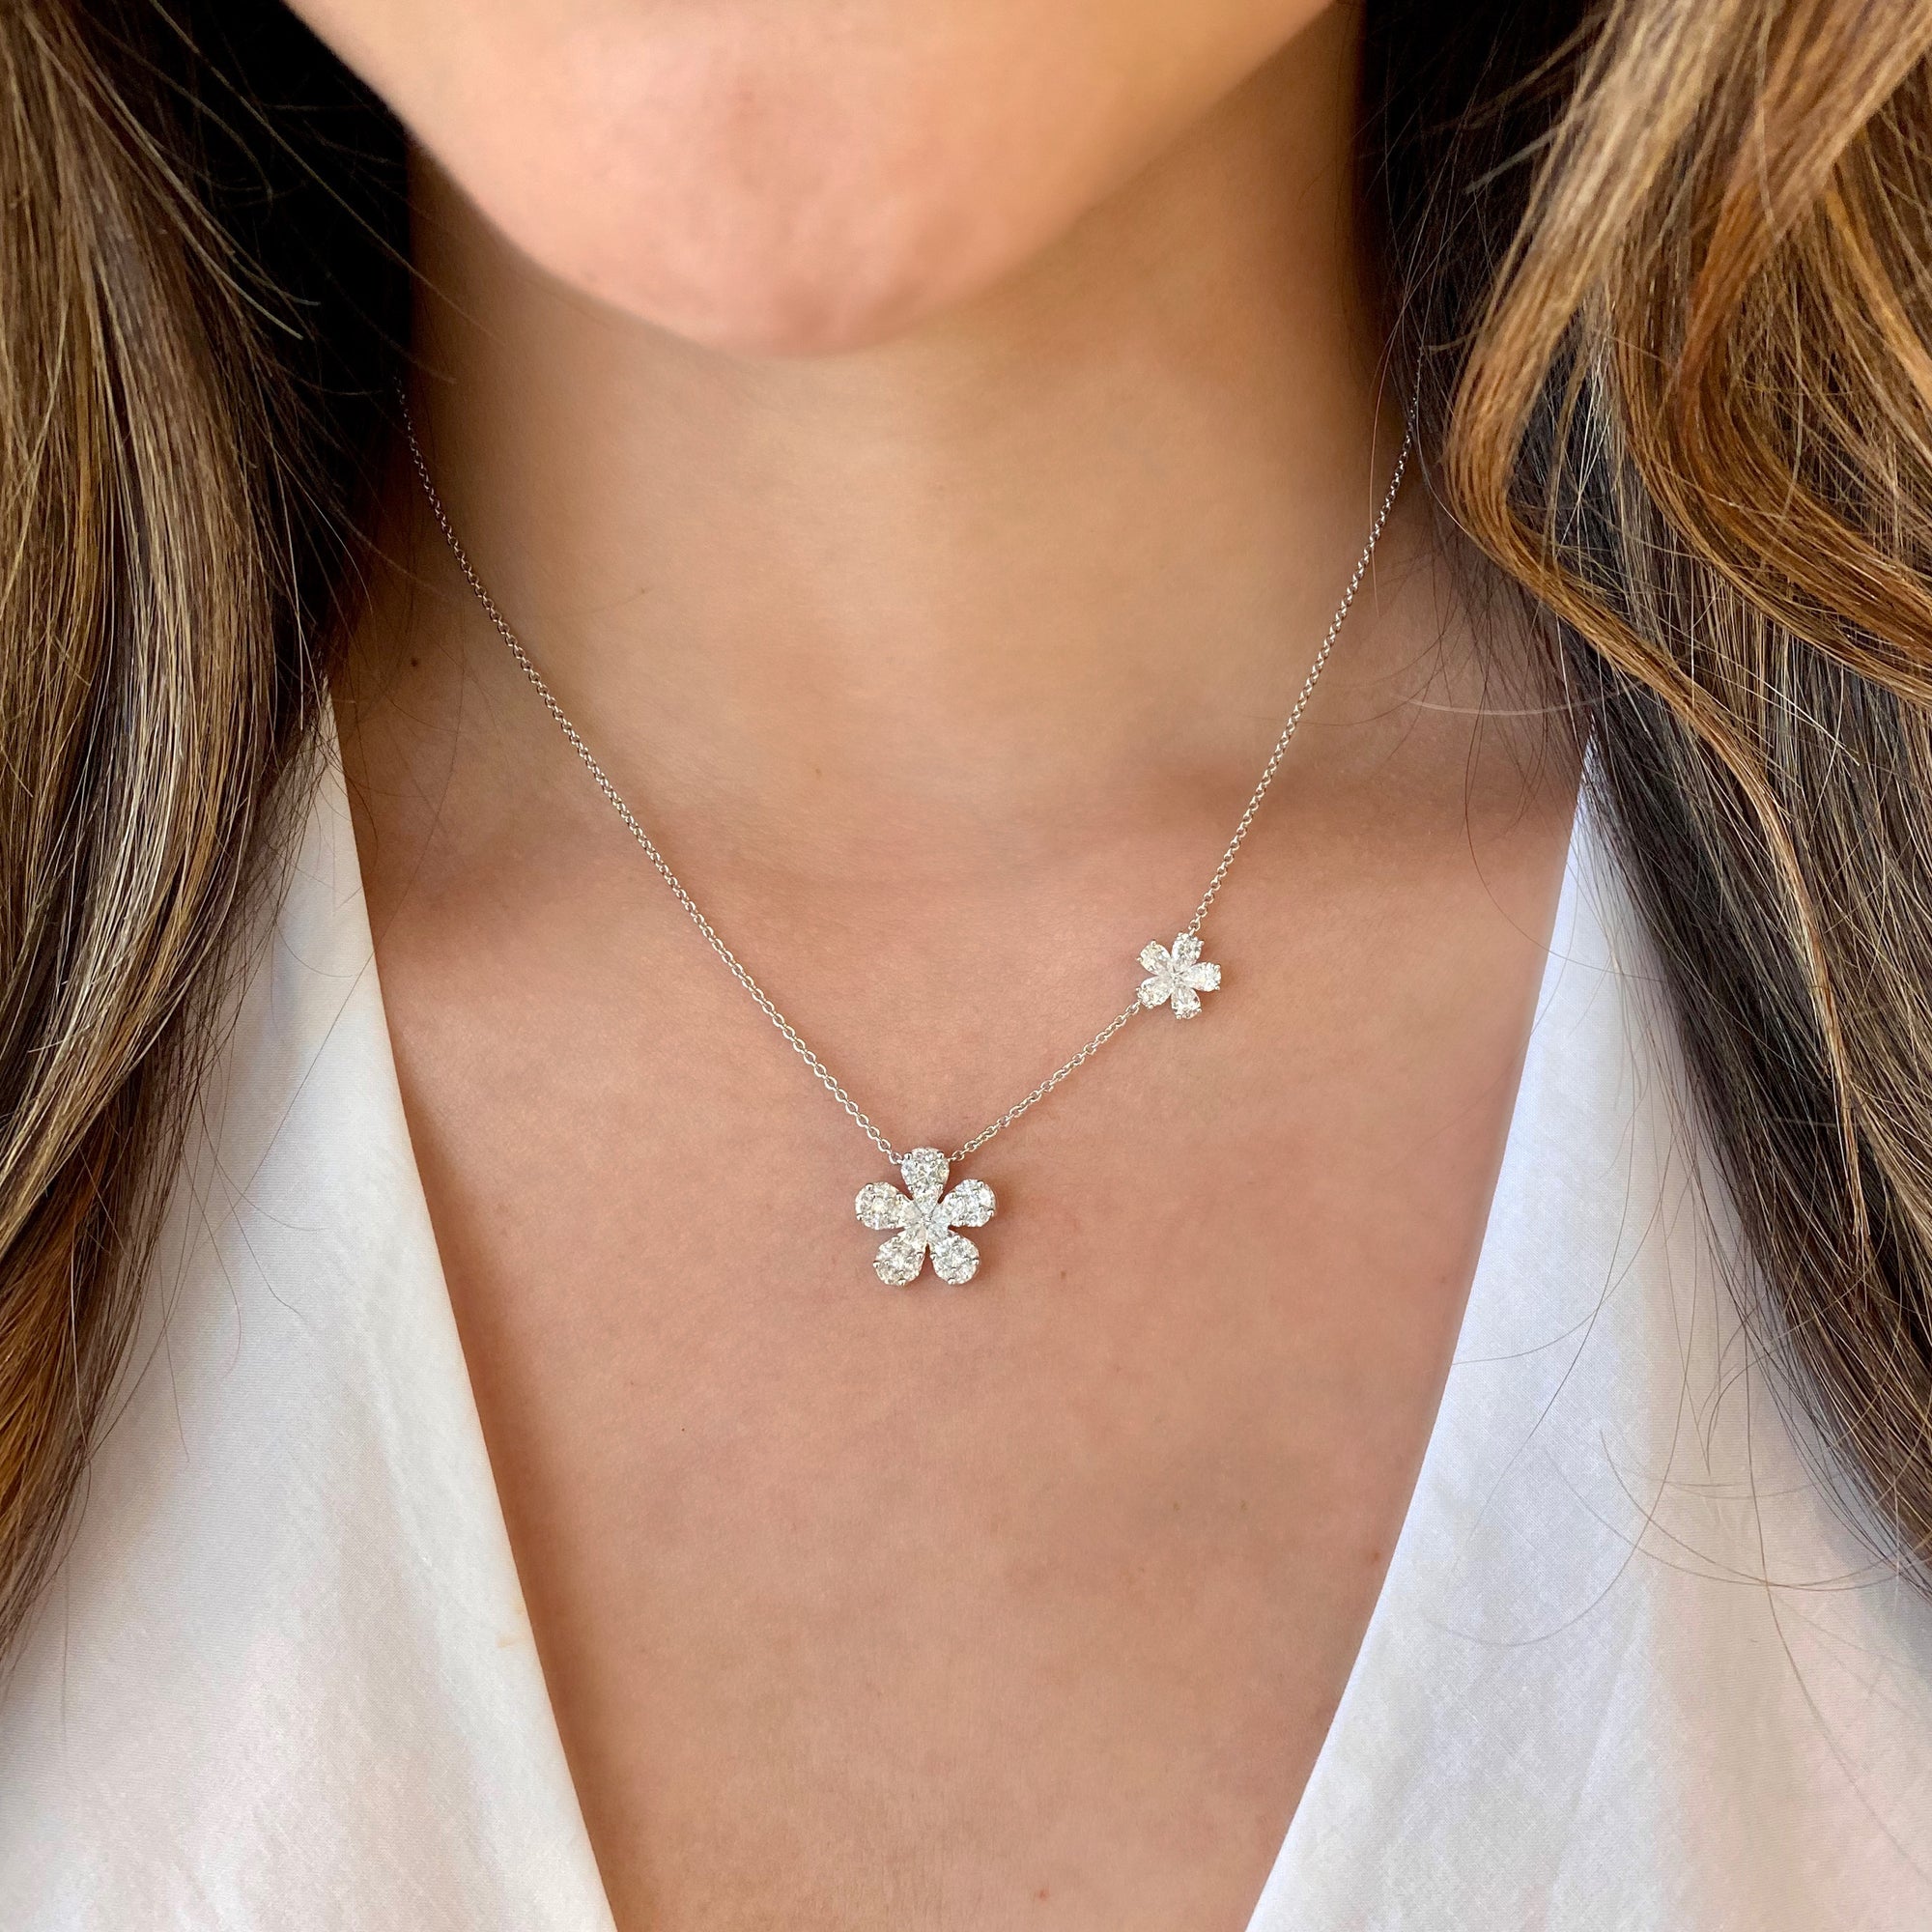 Mixed Cut Diamond Flower Necklace  - 18K gold weighing 5.56 grams  - 10 pear-shaped diamonds totaling 1.13 carats  - 15 marquise-shaped diamonds totaling 0.45 carats  - 5 princess-cut diamonds totaling 0.13 carats